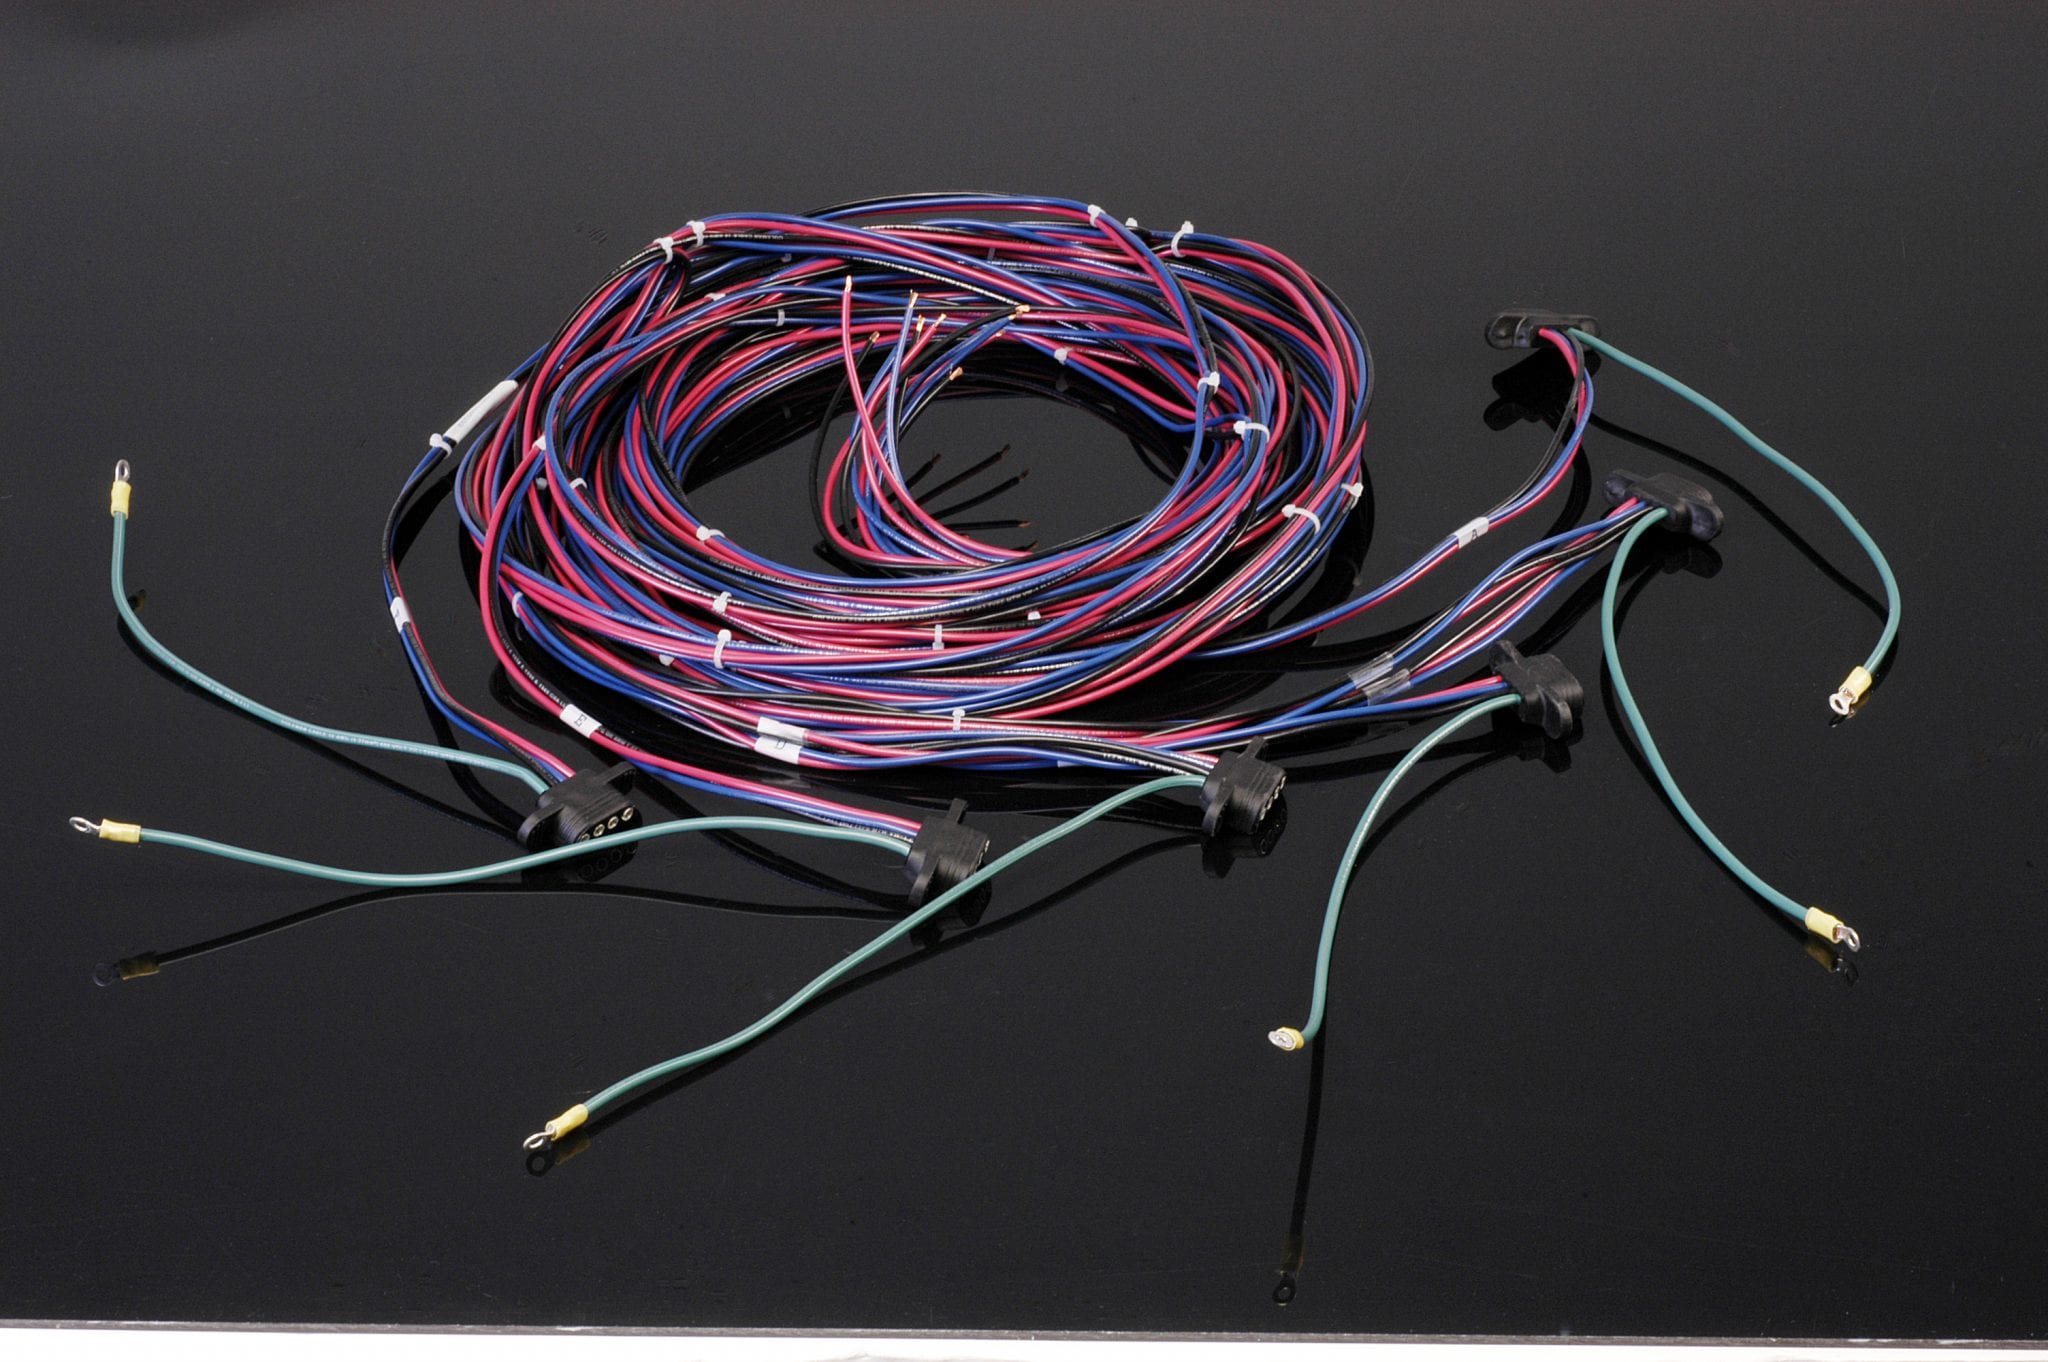 https://www.carriocabling.com/wp-content/uploads/2018/08/carrio-cabling-custom-molded-wire-harness-1.jpg